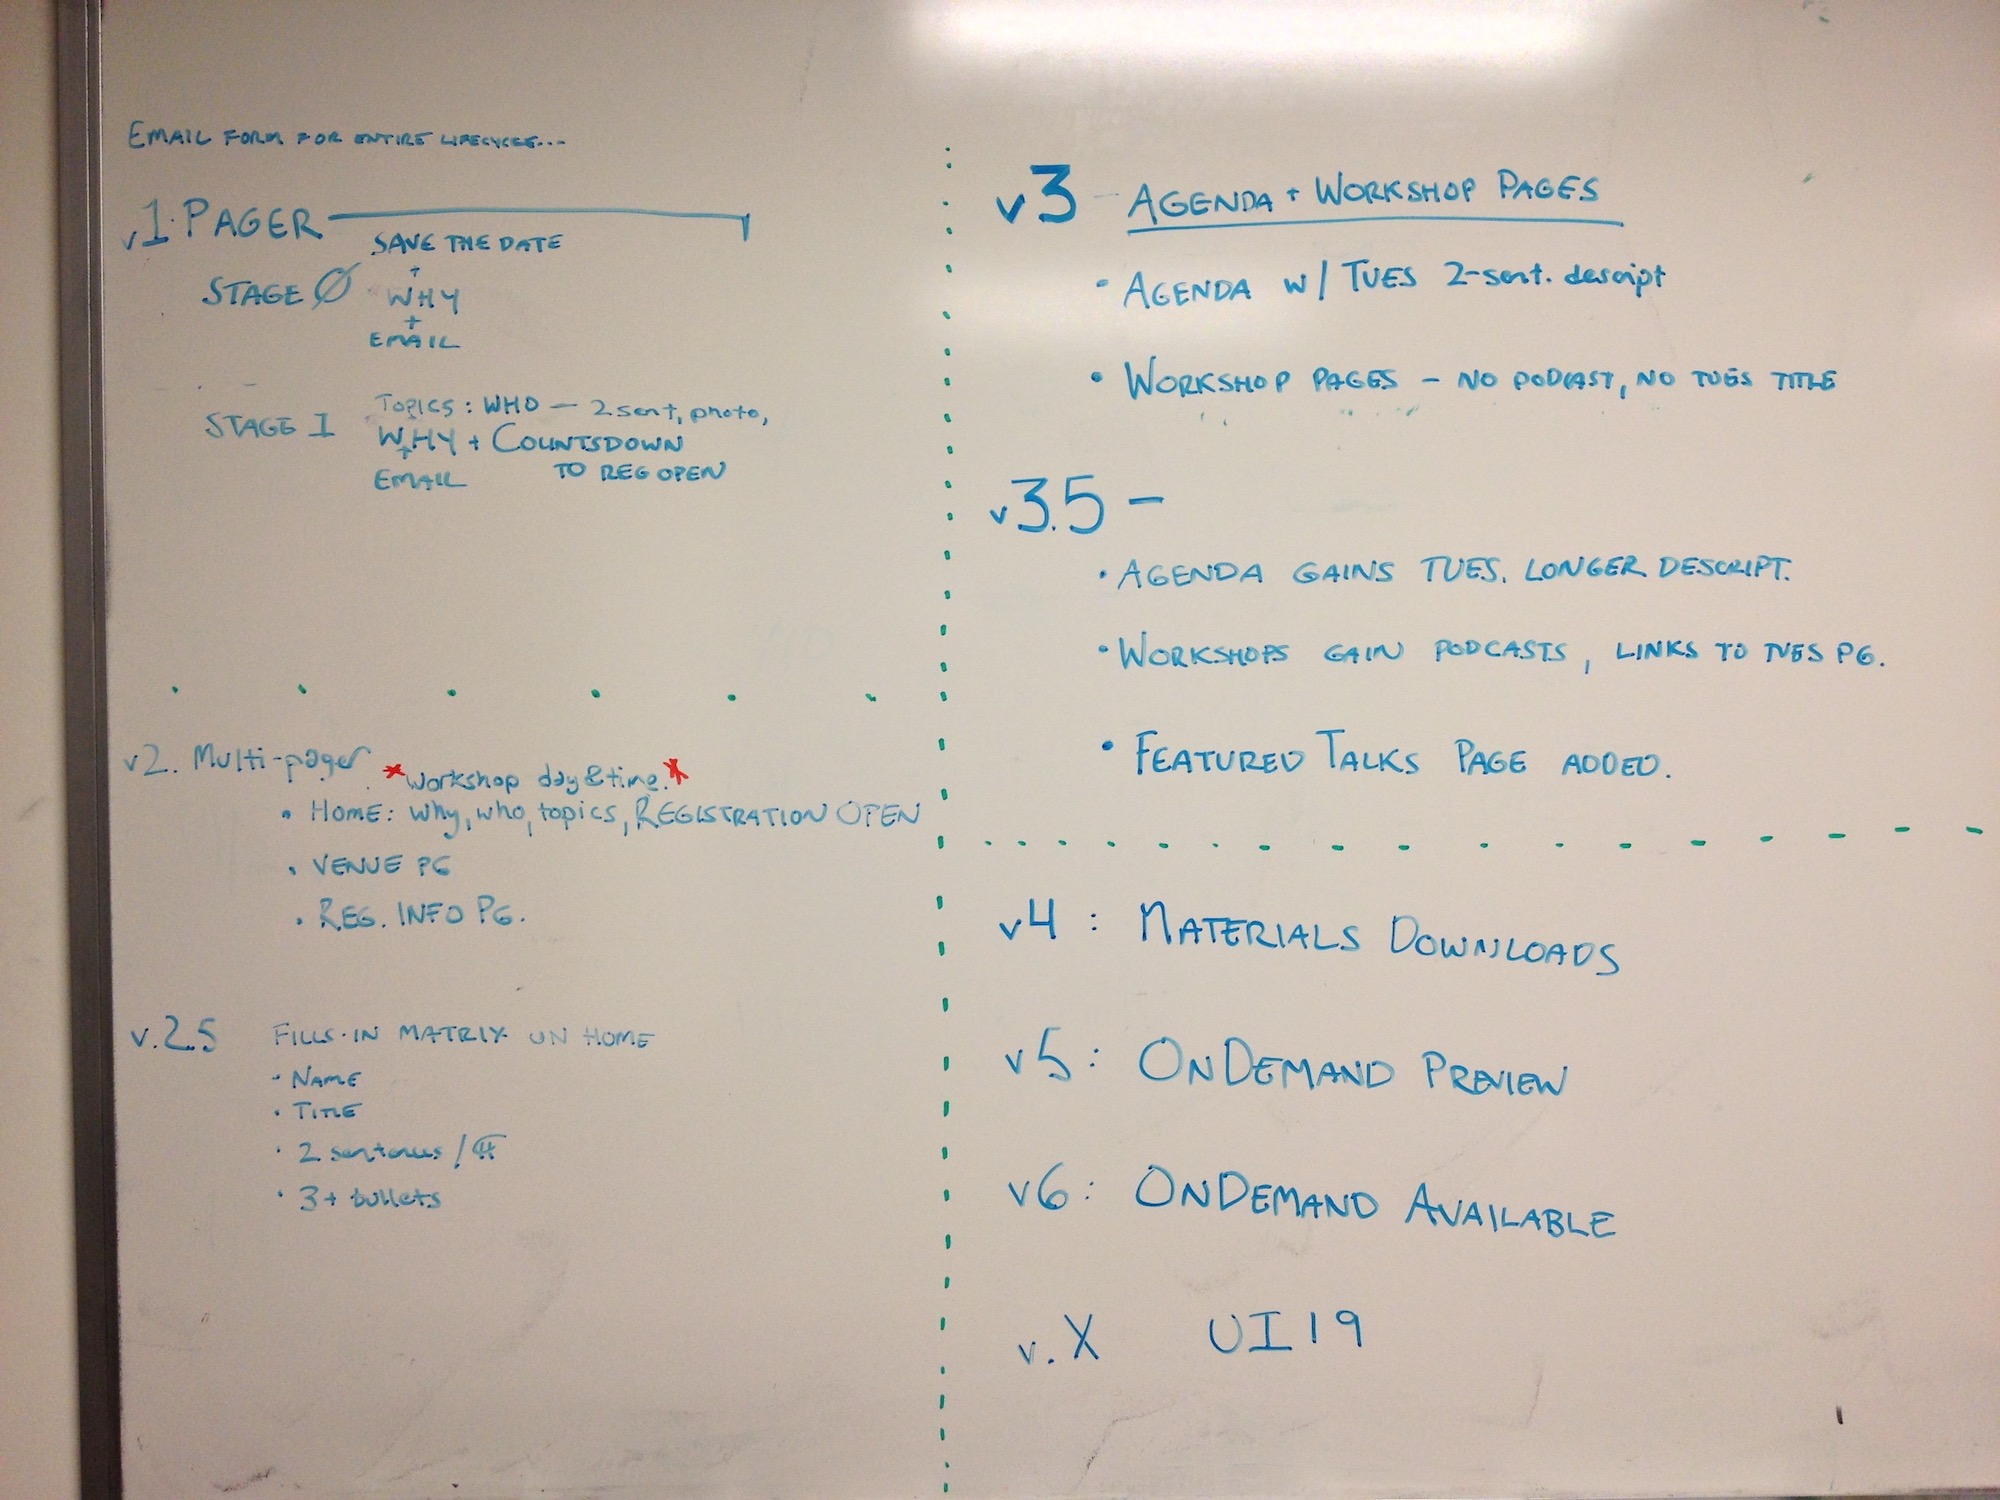 Sketches on a whiteboard planning the stages of UI18's site.